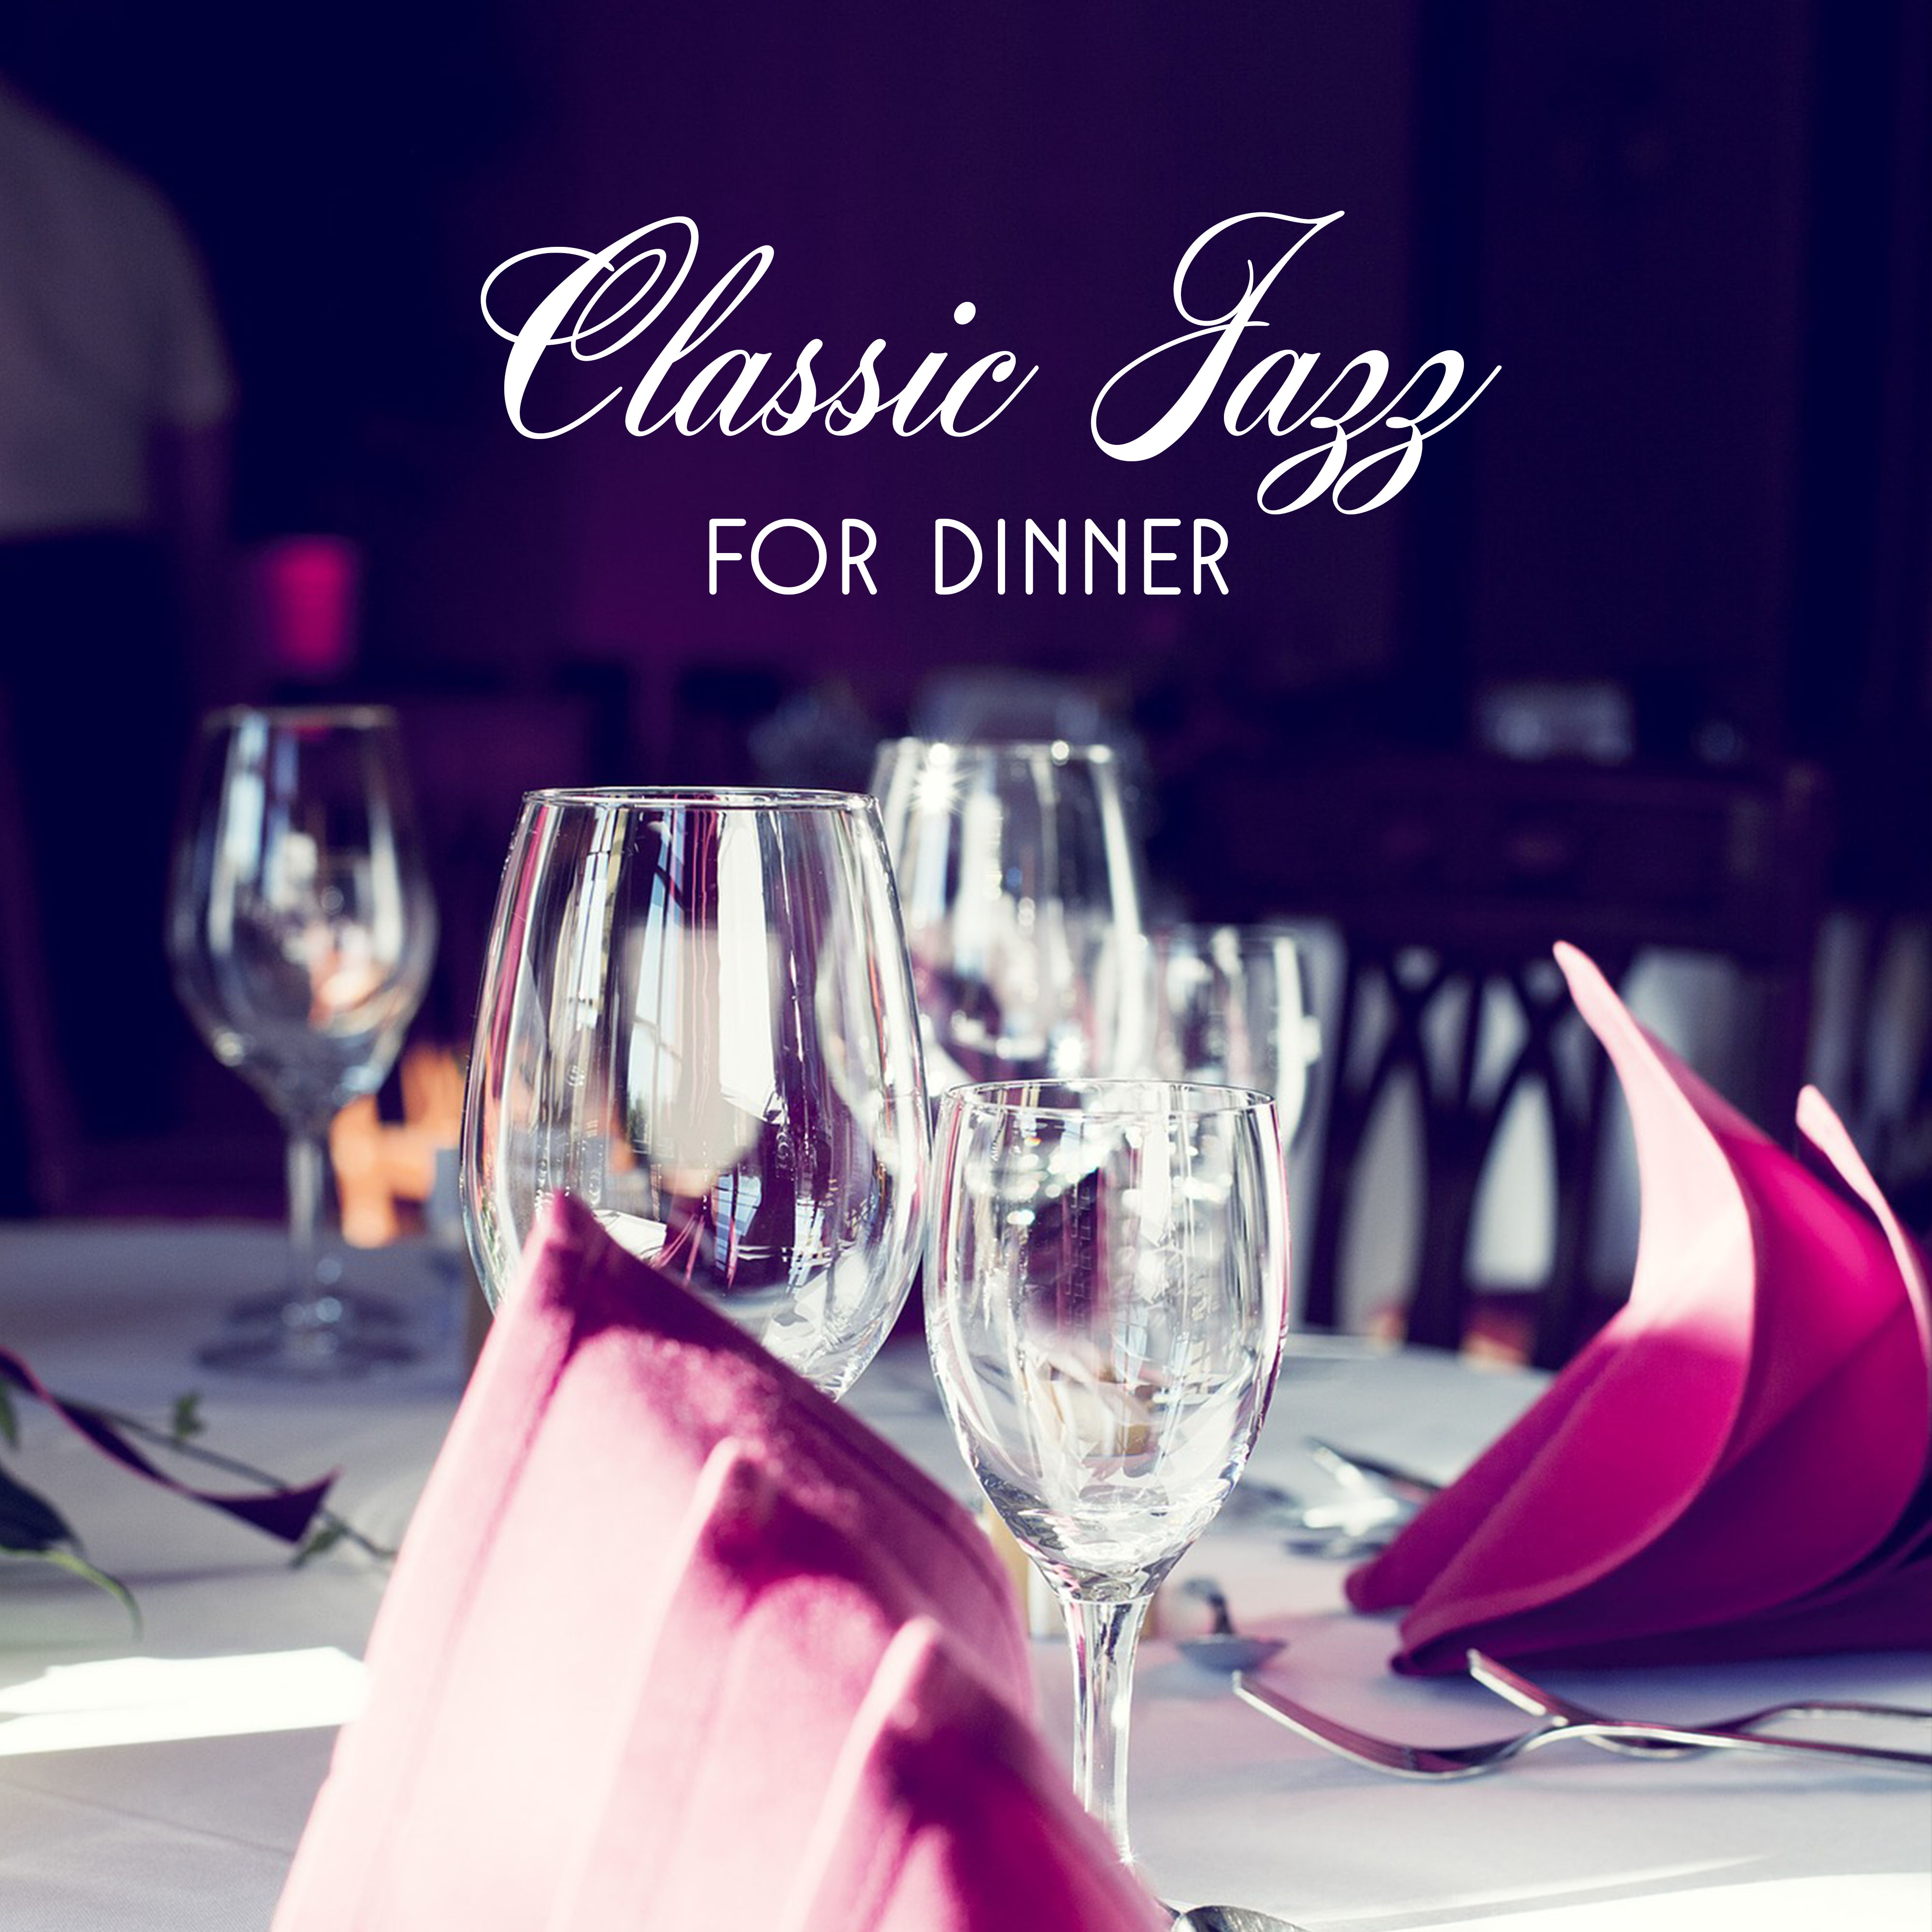 Classic Jazz for Dinner  Calming Jazz, Instrumental Music, Mellow Piano Sounds, Perfect for Family Dinner